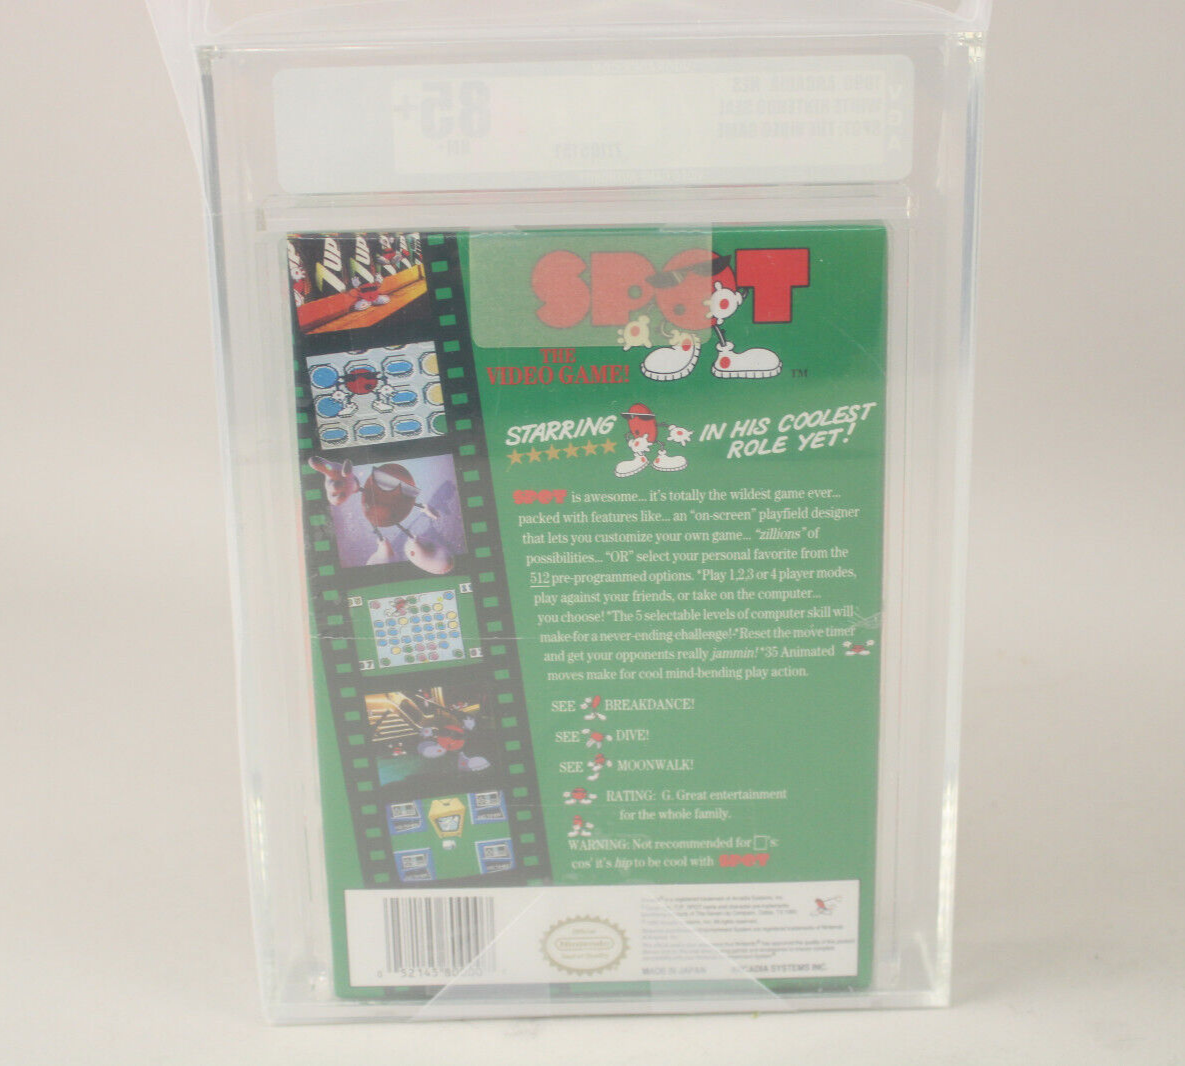 7 Up Spot: The Video Game Nintendo NES New Sealed VGA Graded Gold Level 85+ NM+